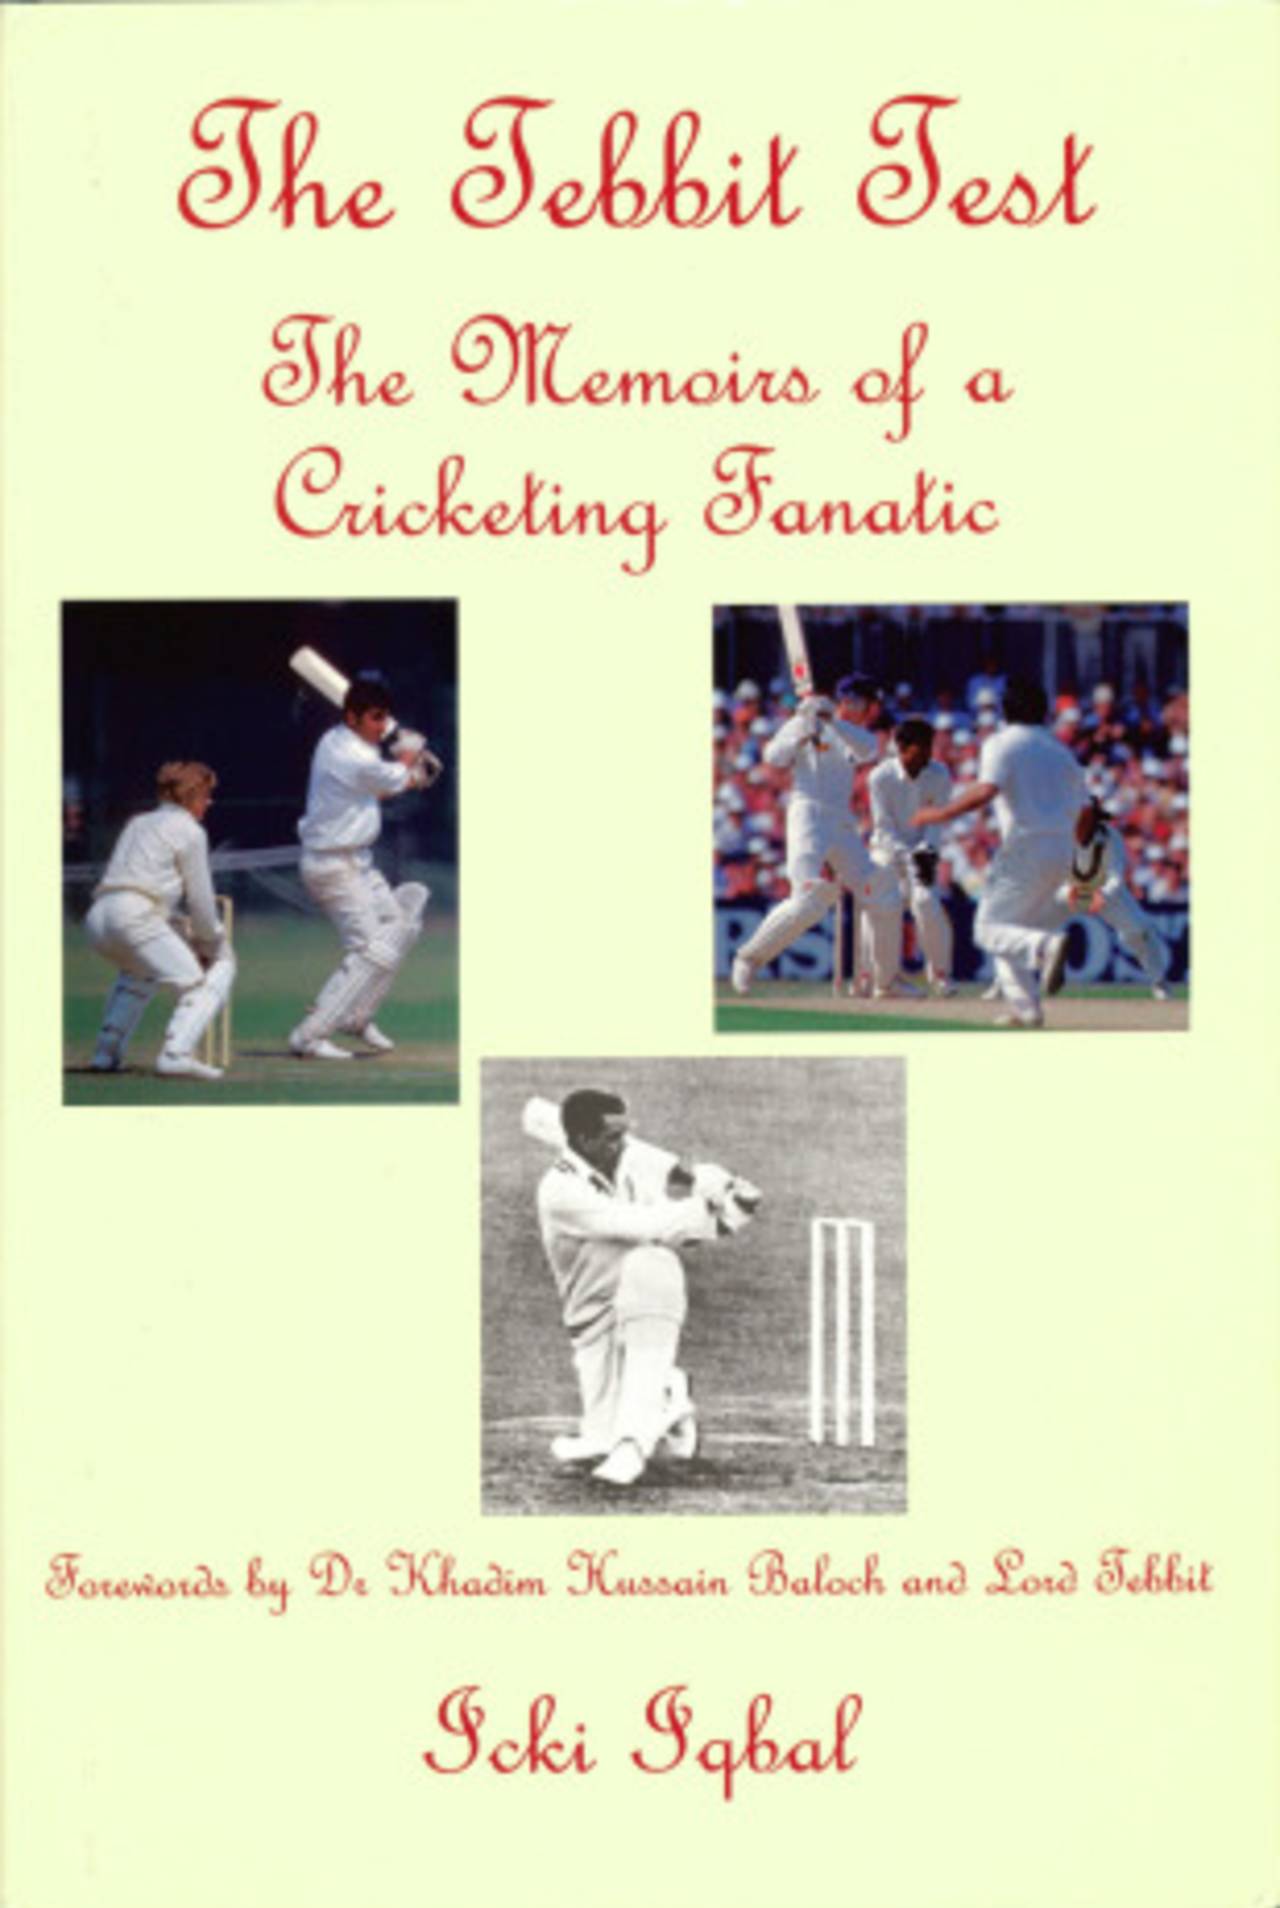 Cover image of <i>The Tebbit Test: The Memoirs of a Cricketing Fanatic</i>, by Icki Iqbal